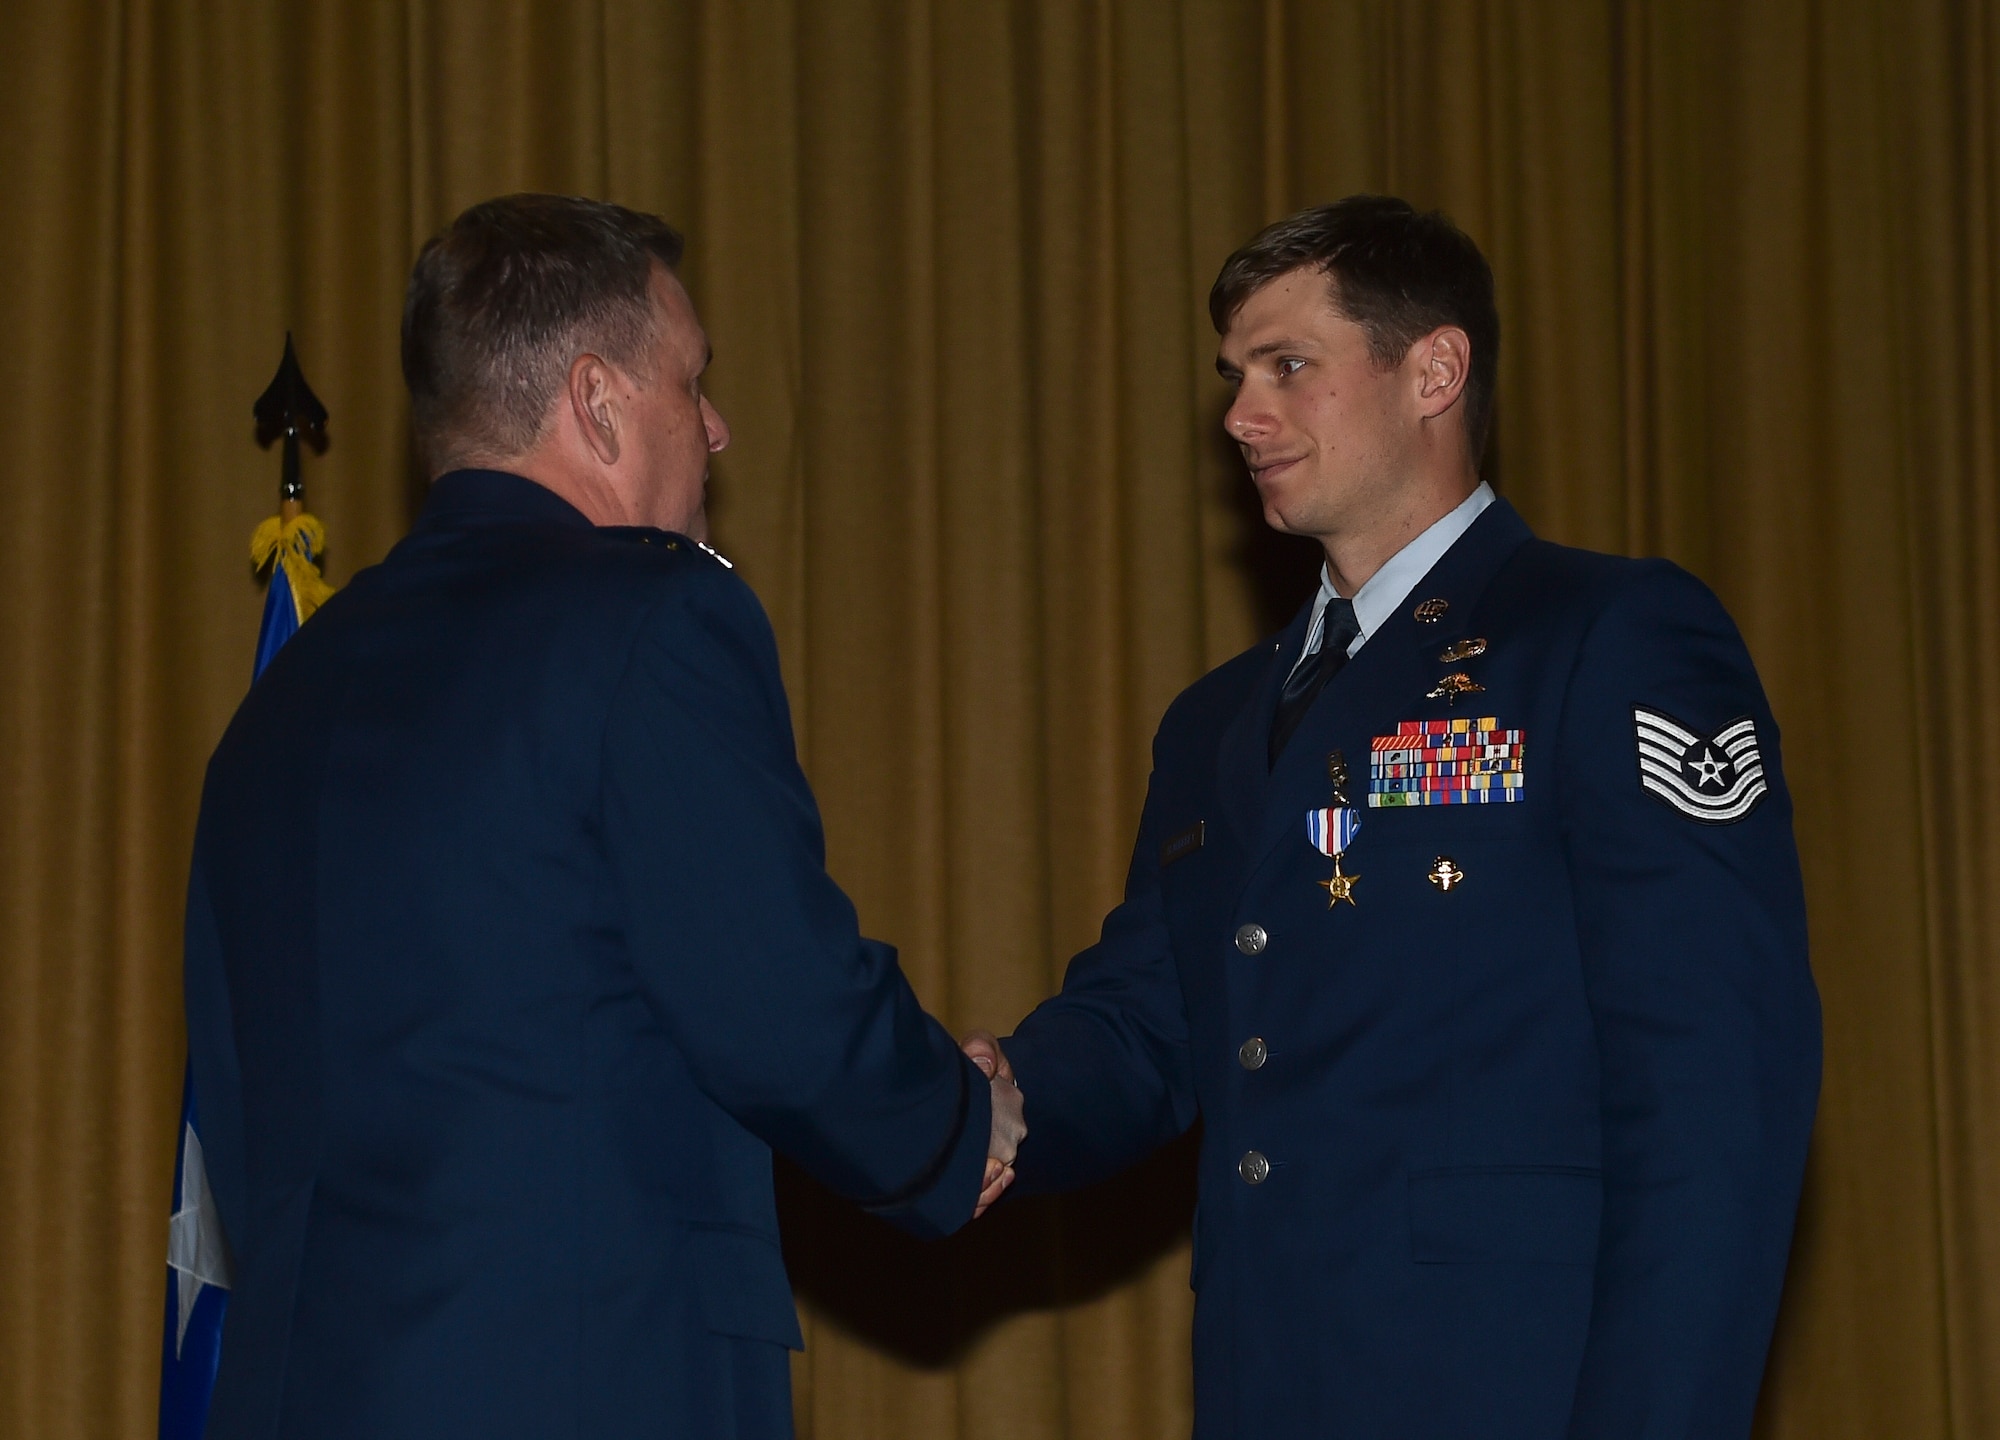 Lt. Gen. Brad Webb, commander of Air Force Special Operations Command, presents Tech. Sgt. Brian Claughsey, a combat controller with the 21st Special Tactics Squadron, a Silver Star Medal April 7, 2017, at Pope Army Airfield, N.C. Following a 96-hour battle with Taliban forces in Afghanistan, Claughsey was credited with coordinating 17 close air engagements, resulting in 47 enemy killed in action without a single civilian or friendly casualty. (U.S. Air Force photo by Senior Airman Ryan Conroy)